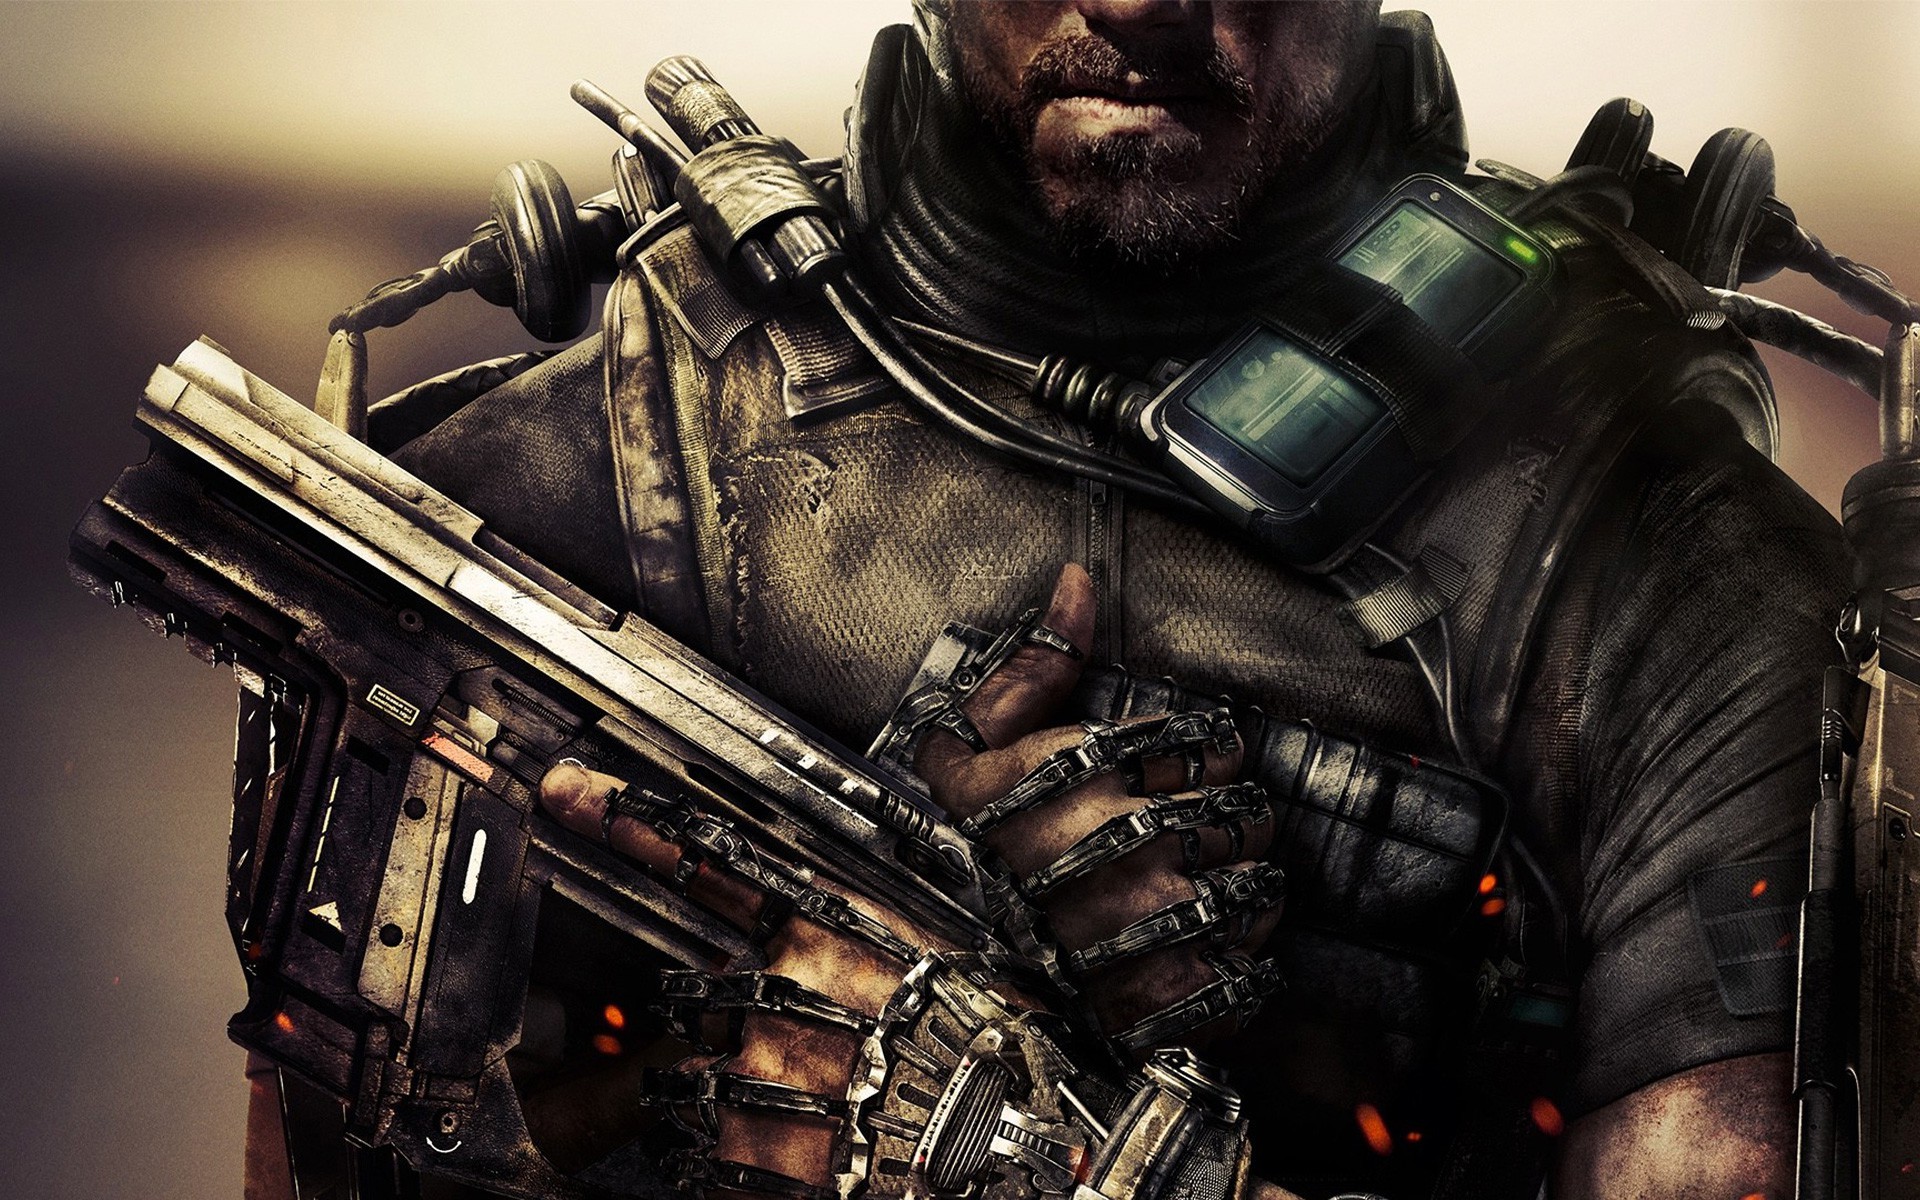 More Call of Duty: Advanced Warfare in-game screens and 